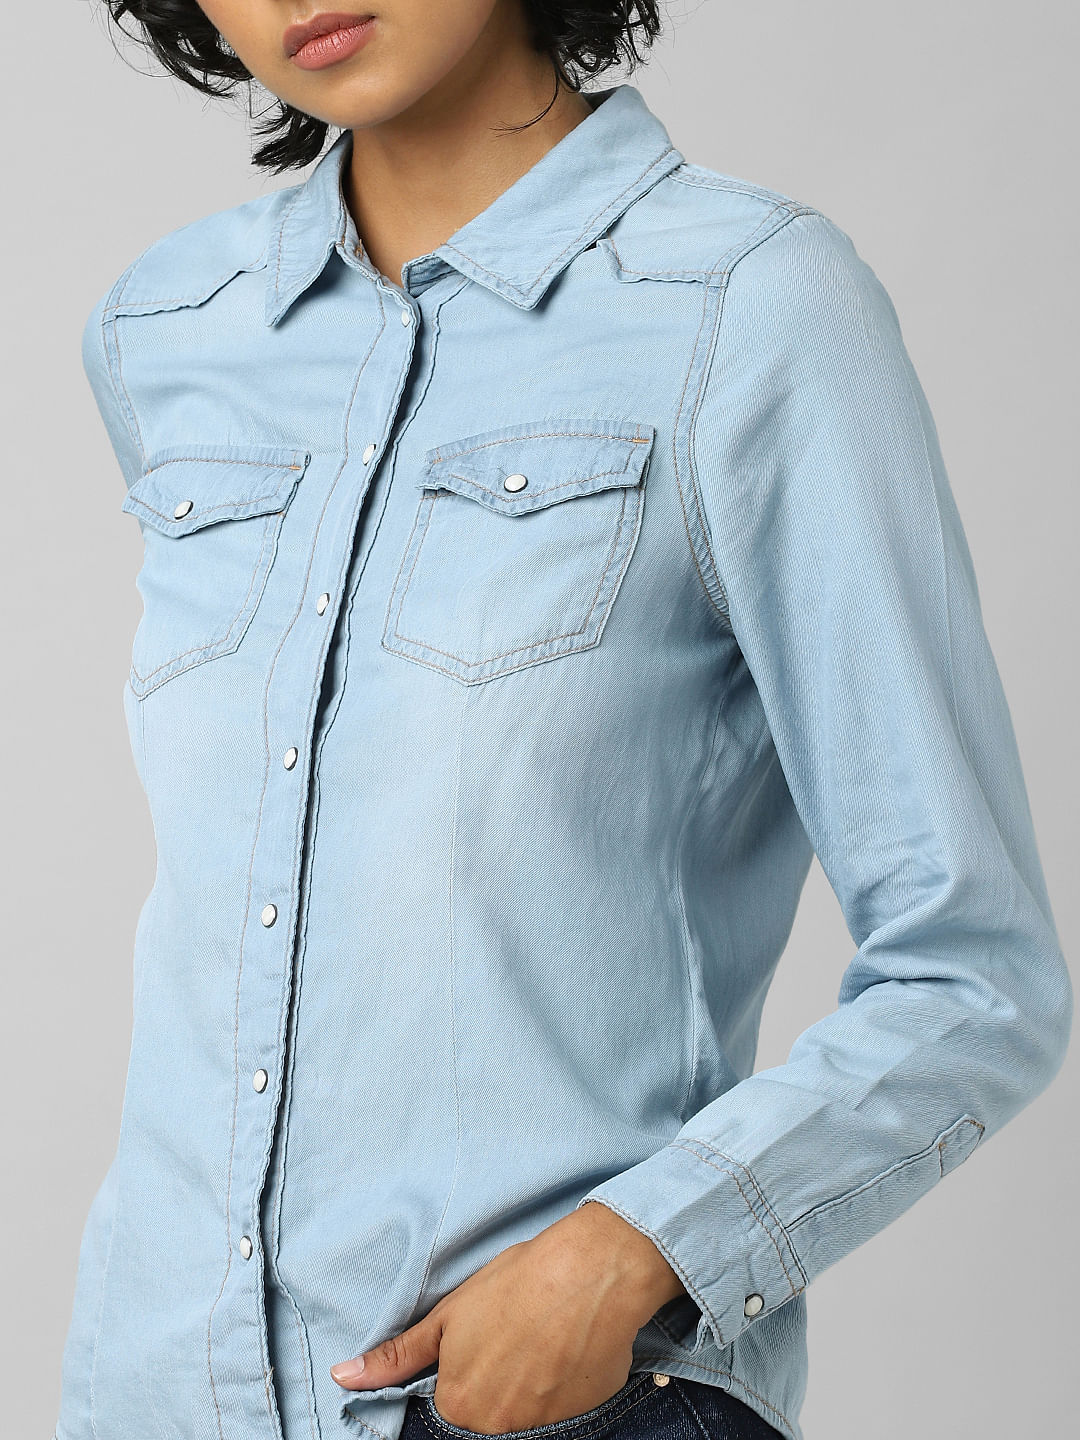 Light Blue Jeans Shirts - Buy Light Blue Jeans Shirts online in India